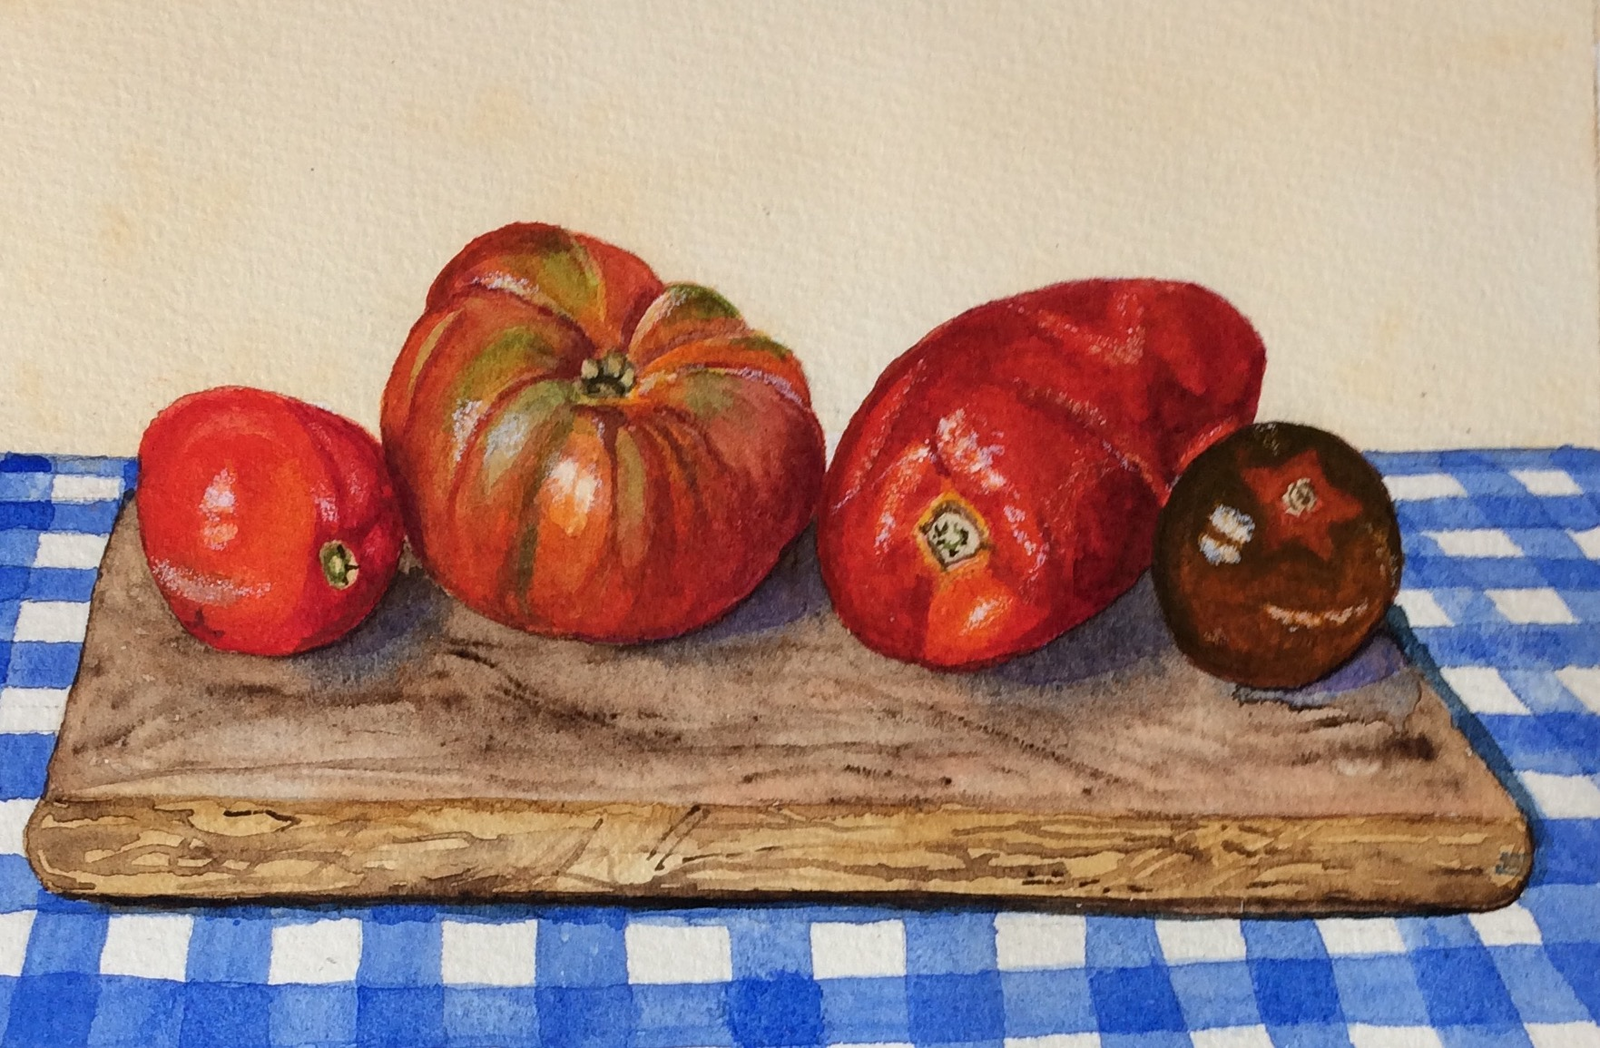 Tomatoes - sold